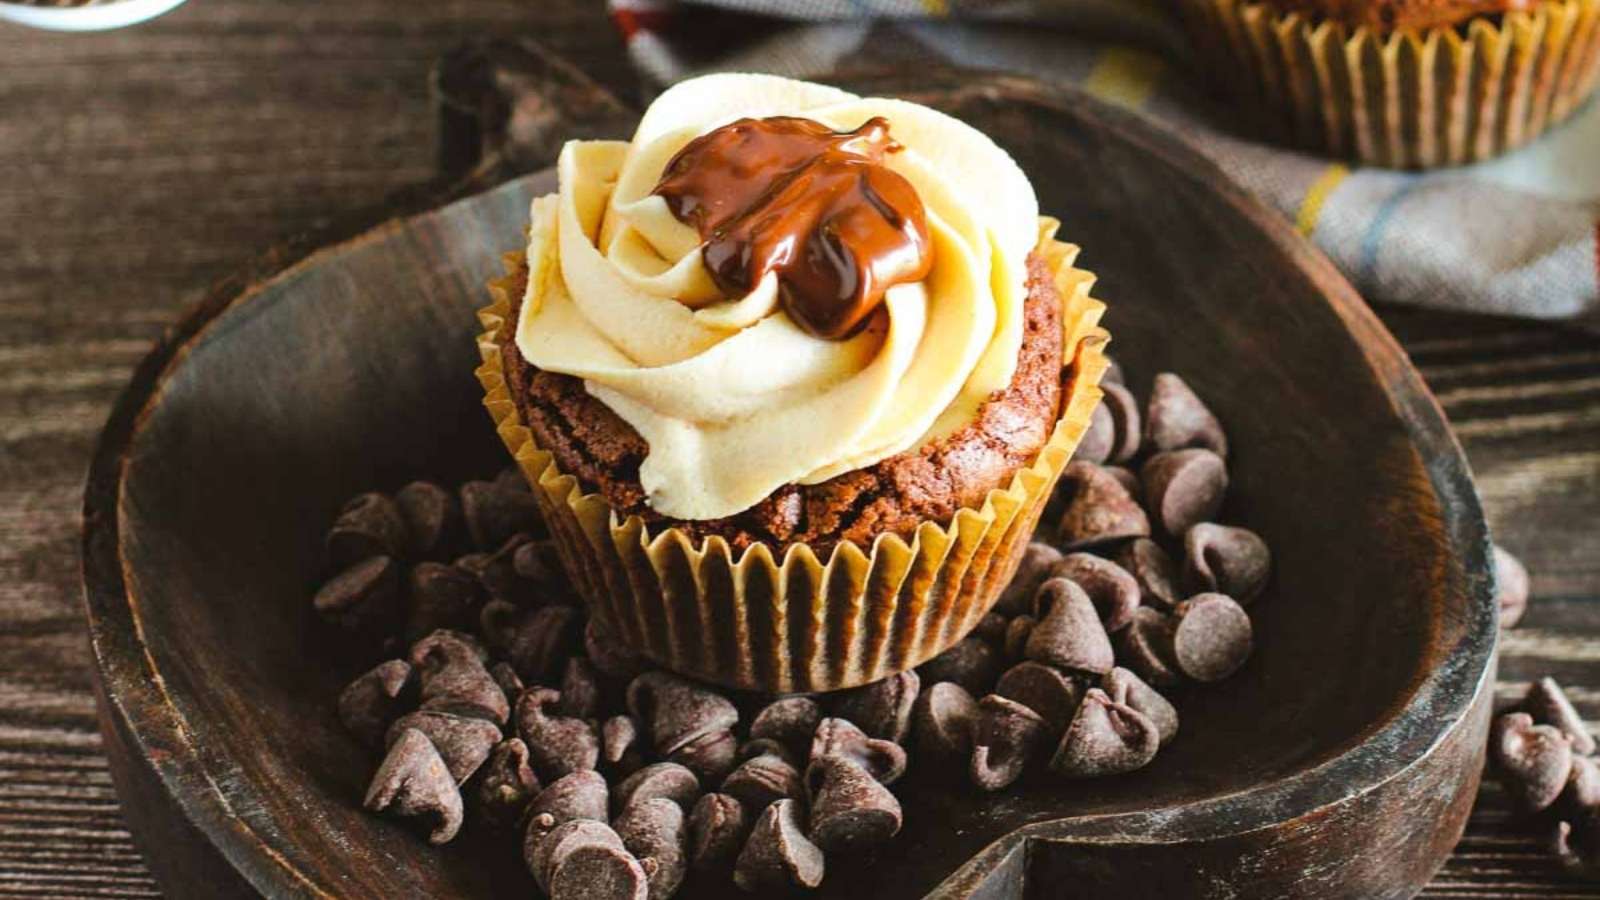 Chocolate Peanut Butter Buckeye Cupcakes recipe by The Peasant’s Daughter.